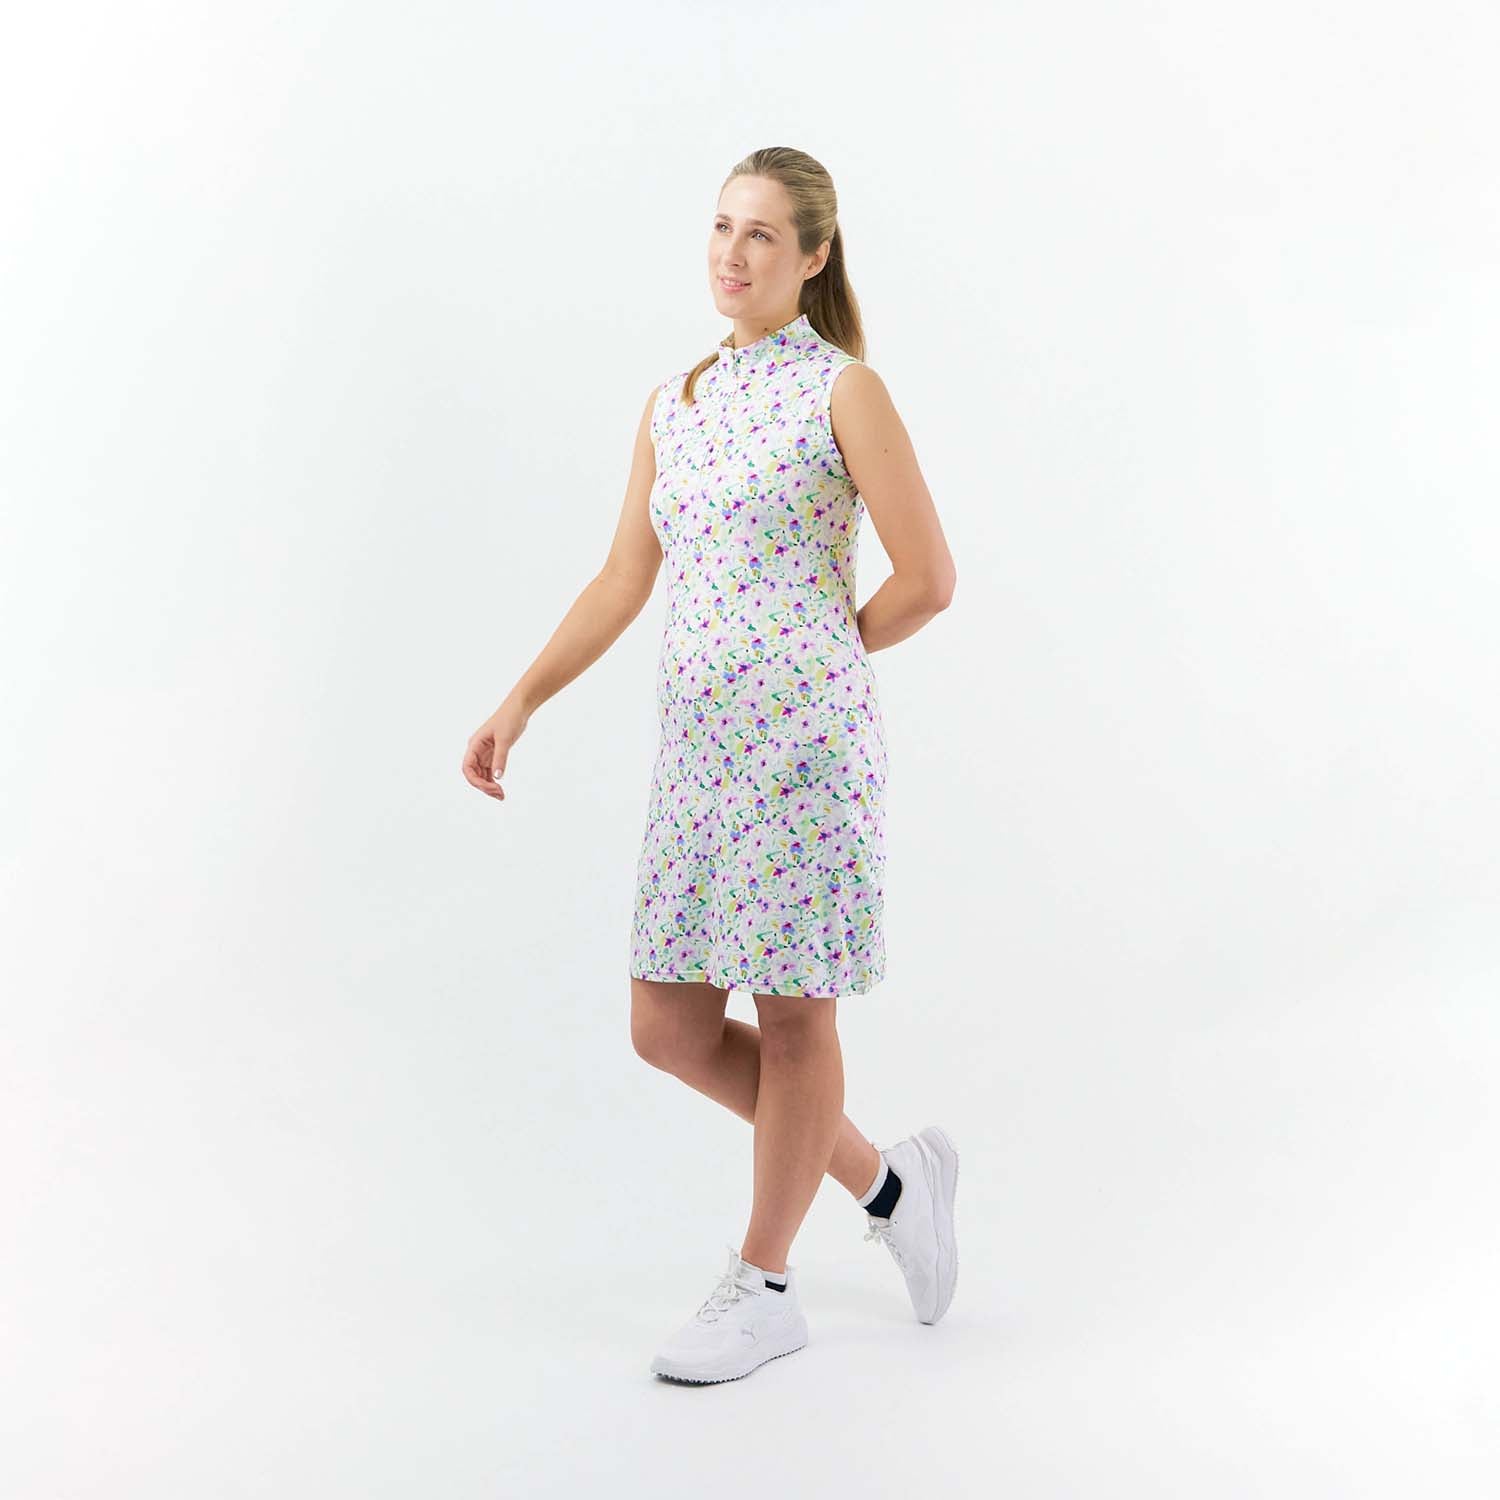 Pure Golf Sleeveless Dress in Ethereal Bouquet Print